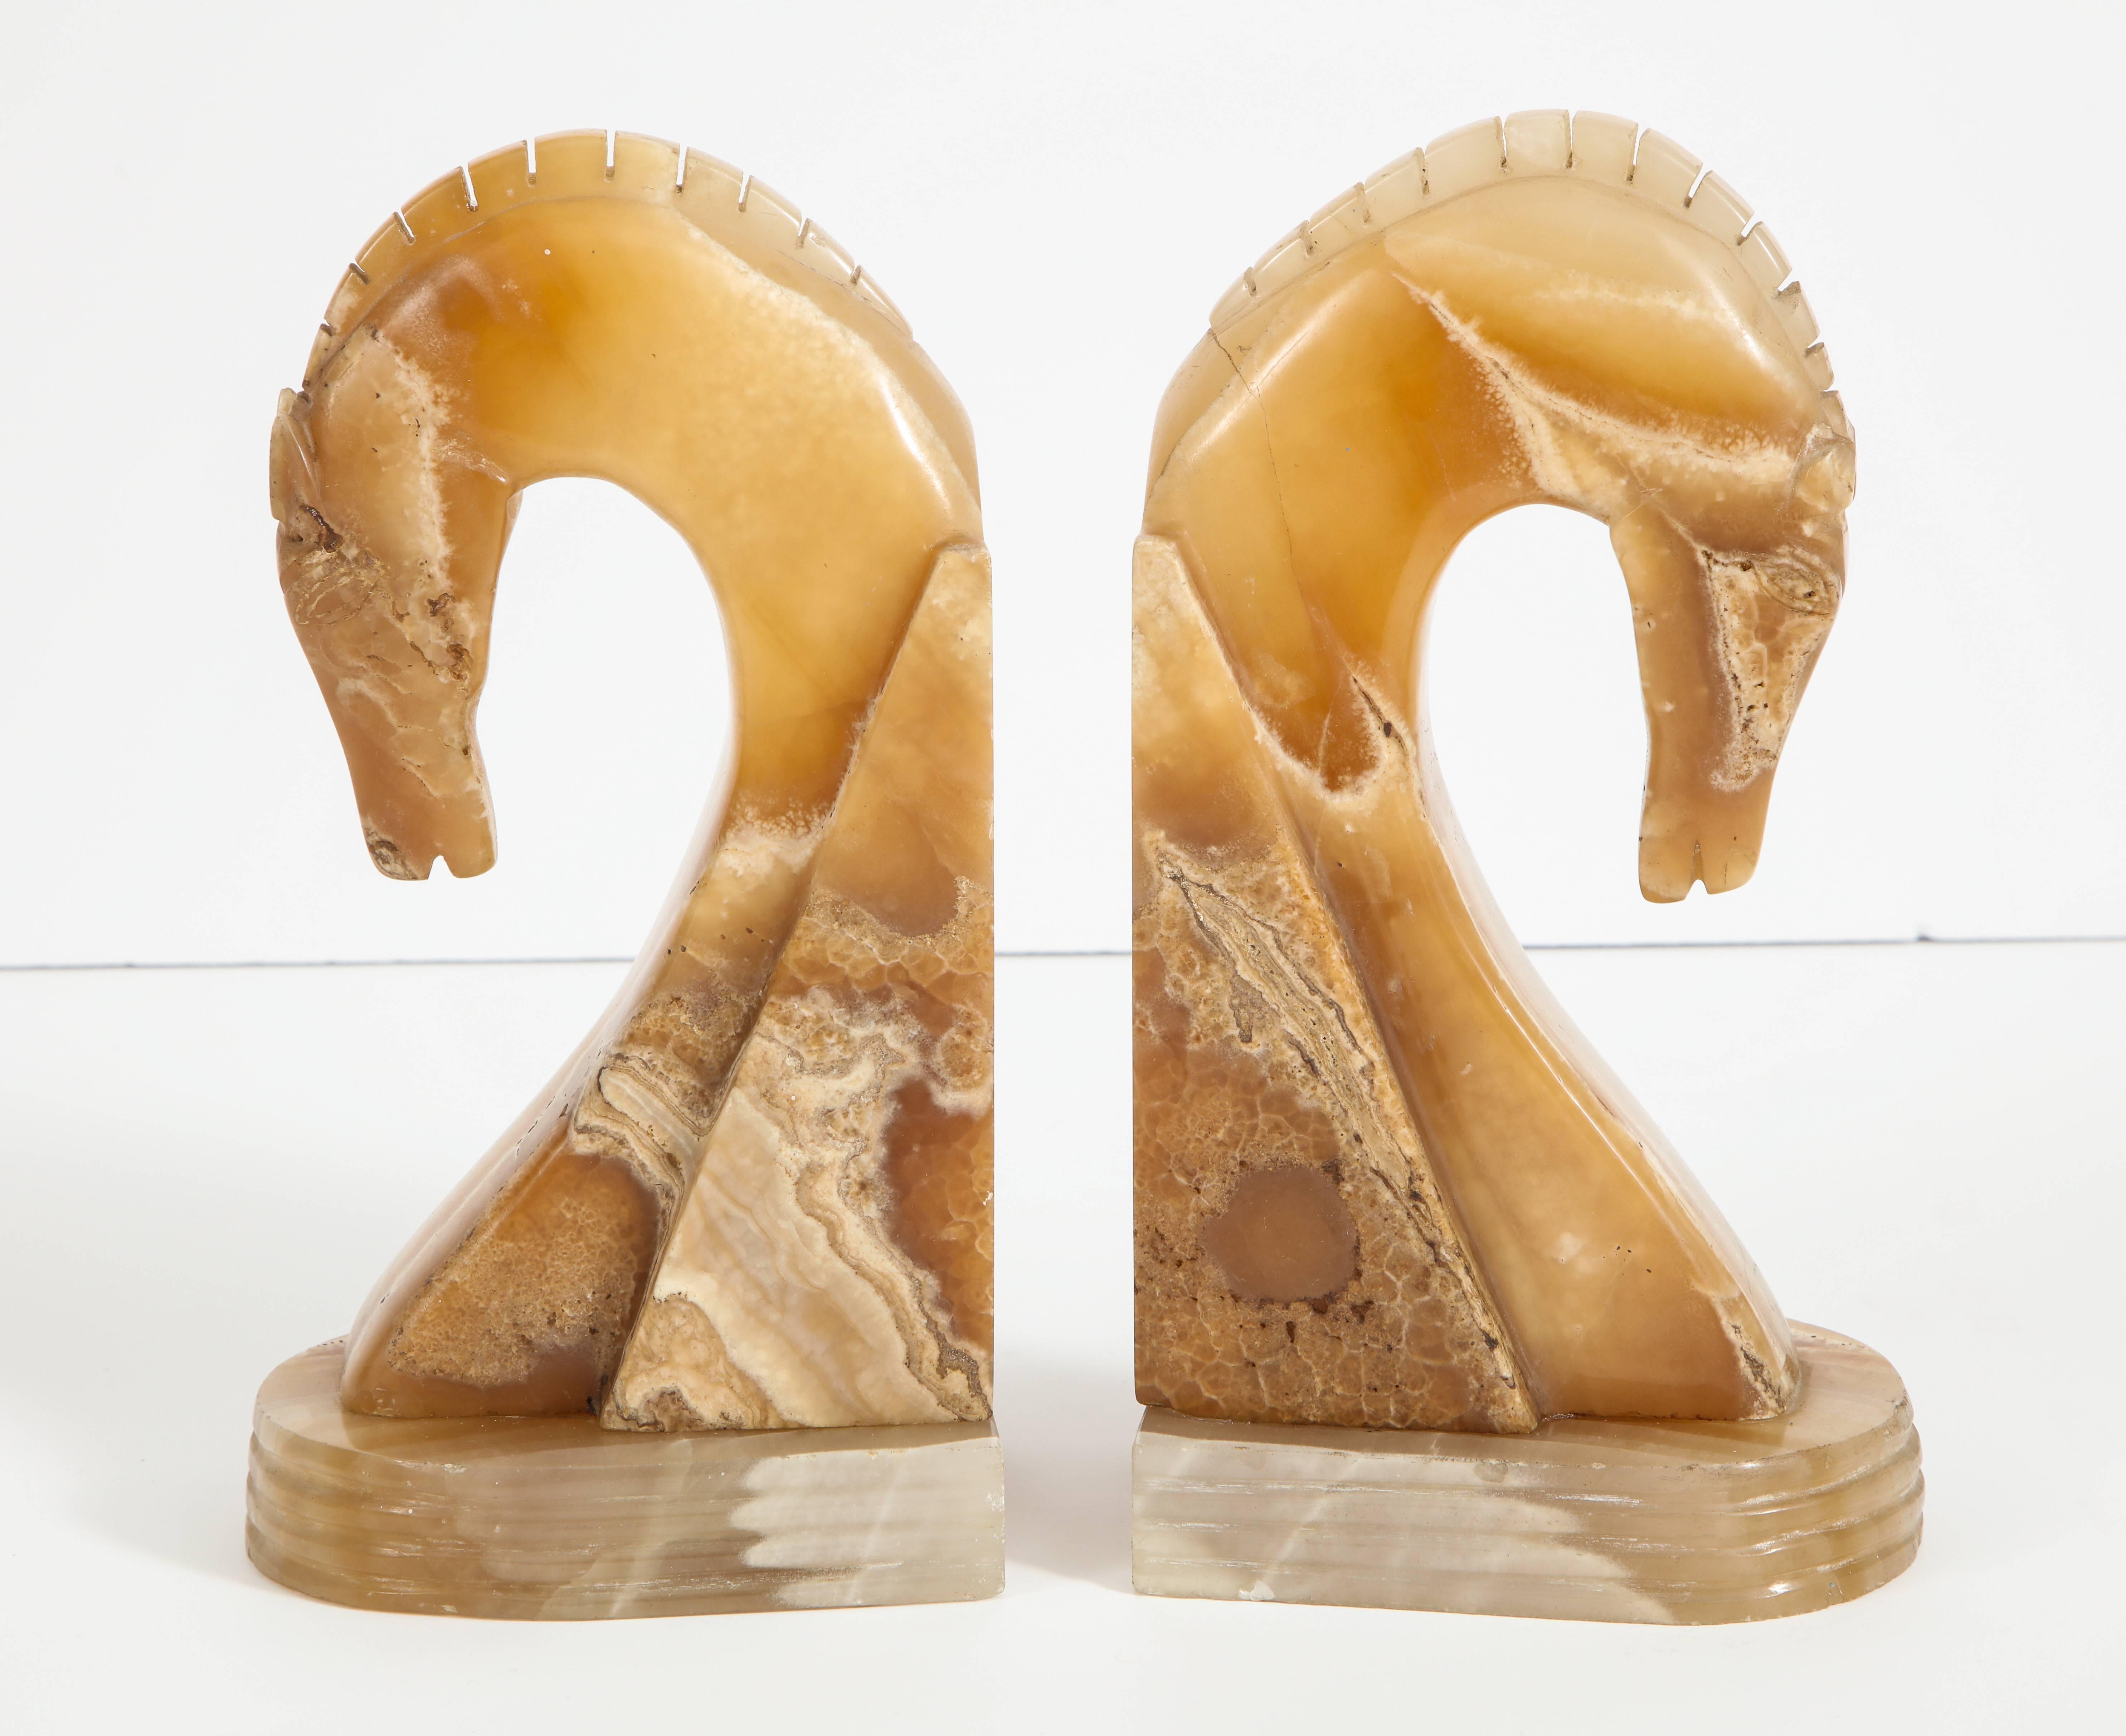 A beautiful and elegant pair of Art Deco hand-carved onyx horse head sculptural bookends with bowed head and ribbed bases.
Italy, circa 1940
Size: 11